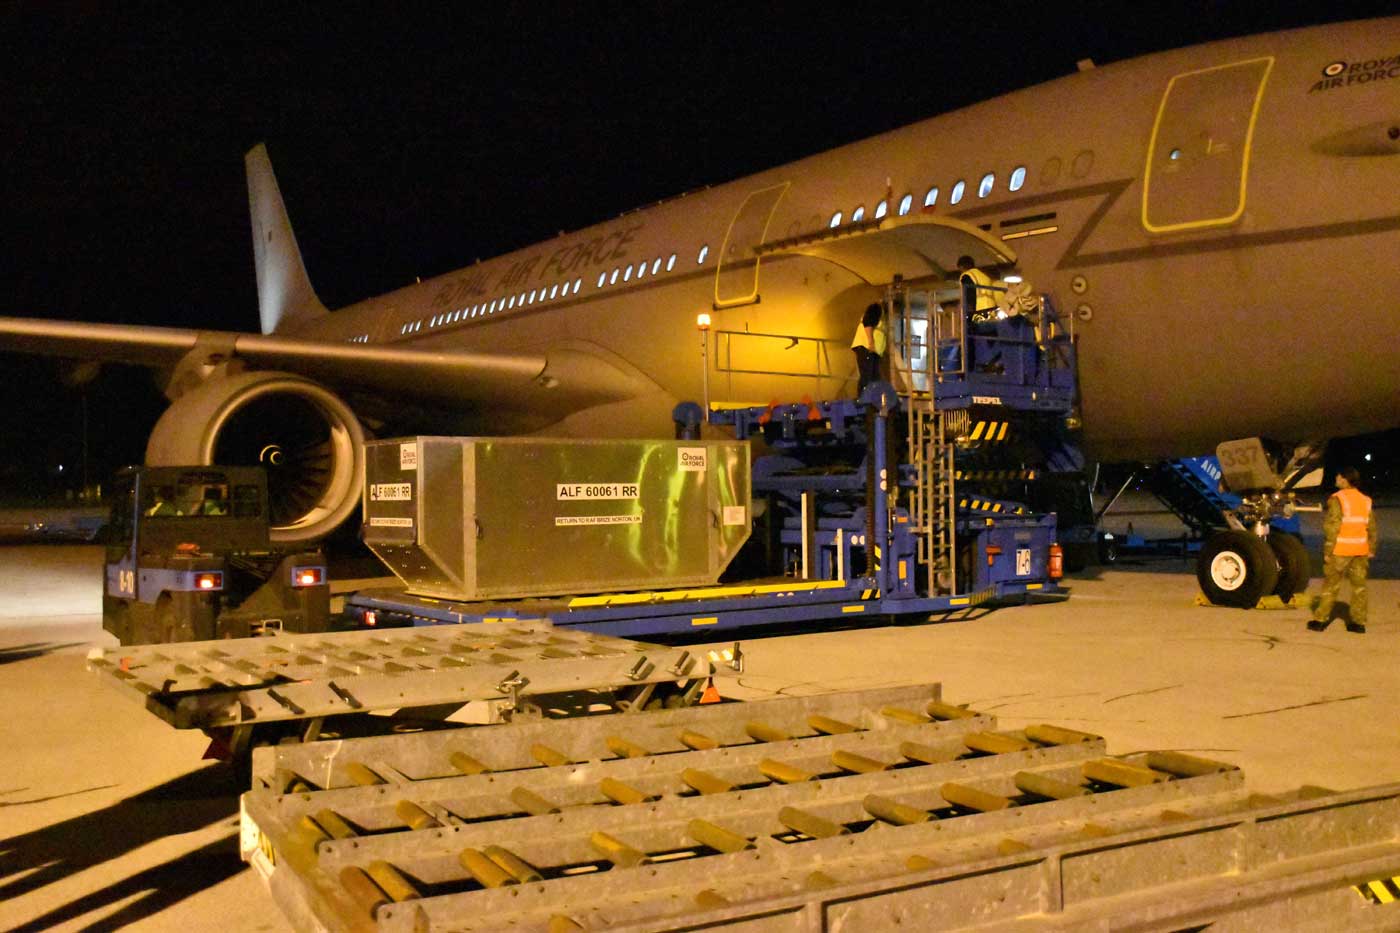 Royal Air Force Voyager A330-200 aircraft unloading cargo at Sarajevo Airport